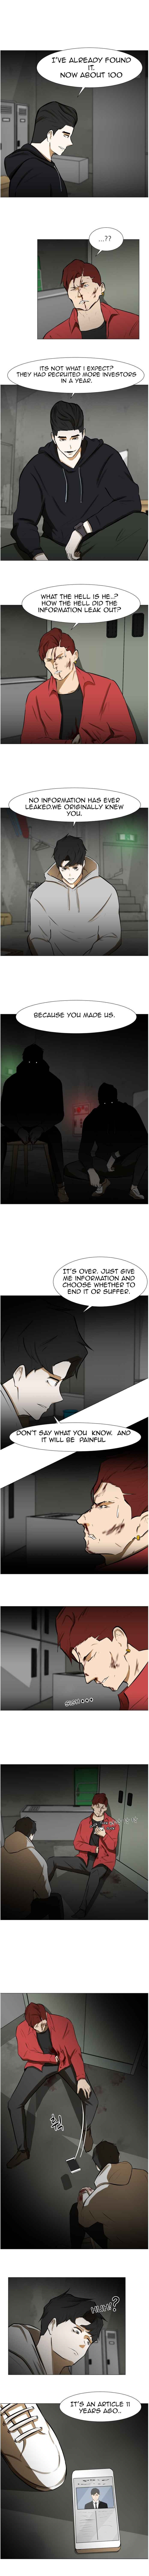 Dark Mortal Chapter 49 page 2